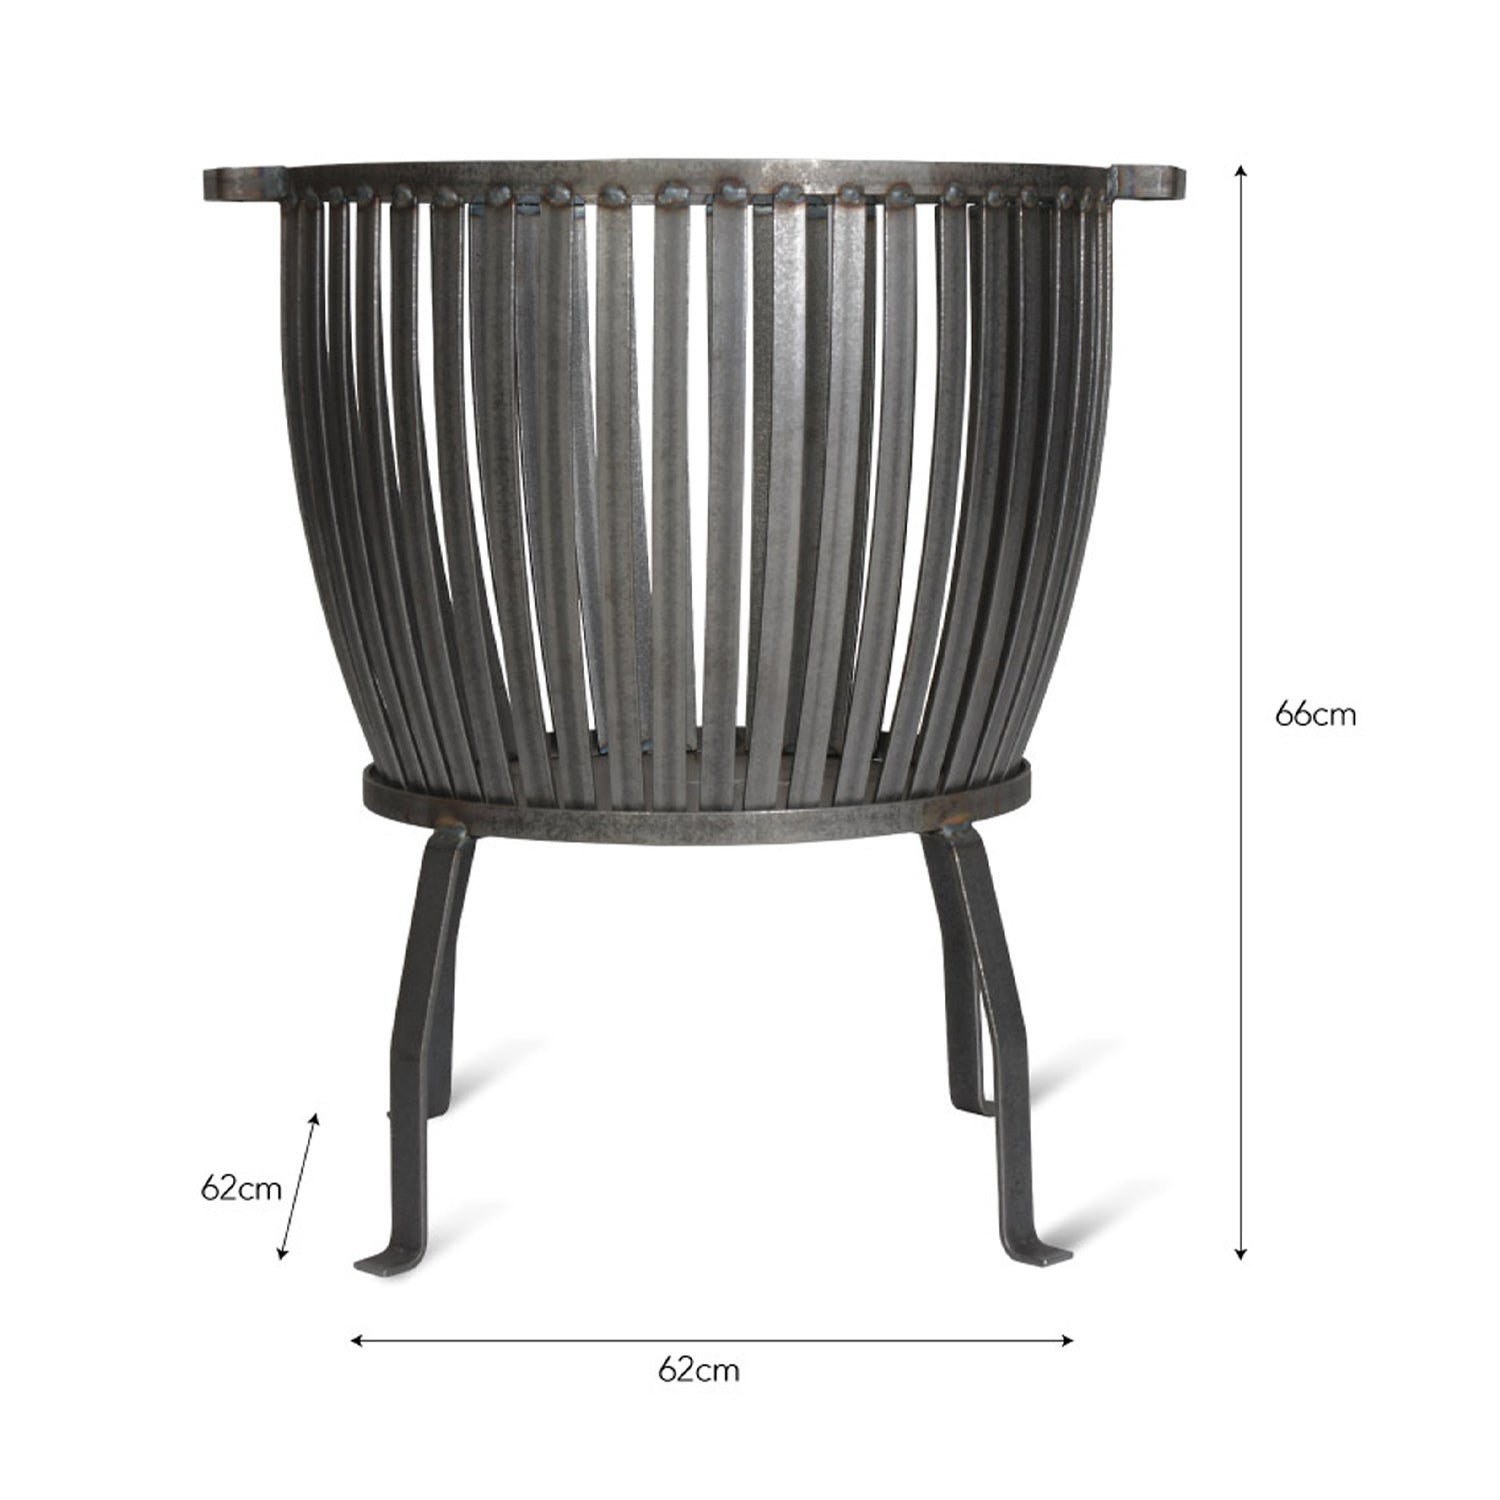 Barrington Fire Pit Large Steel by Garden Trading